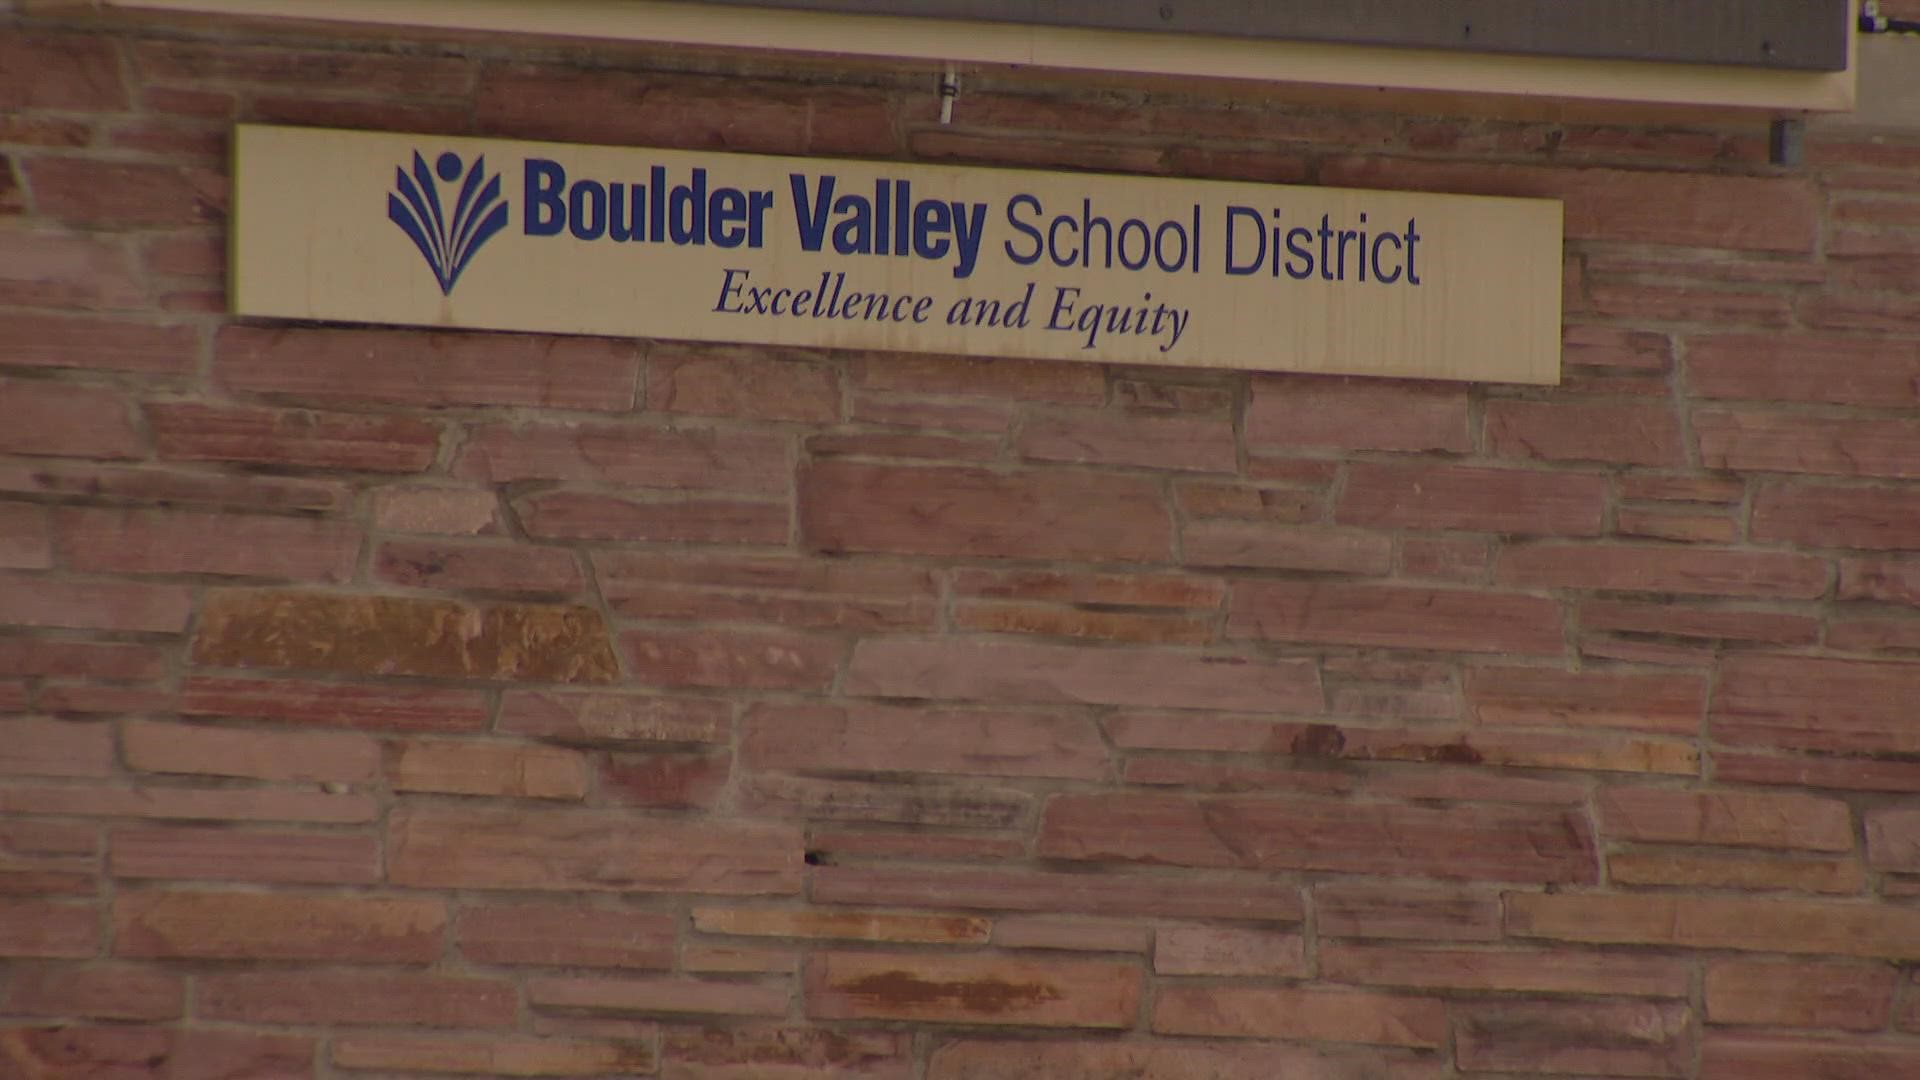 Law enforcement agencies responded to more than a dozen fake threats to schools and districts across Colorado Wednesday.